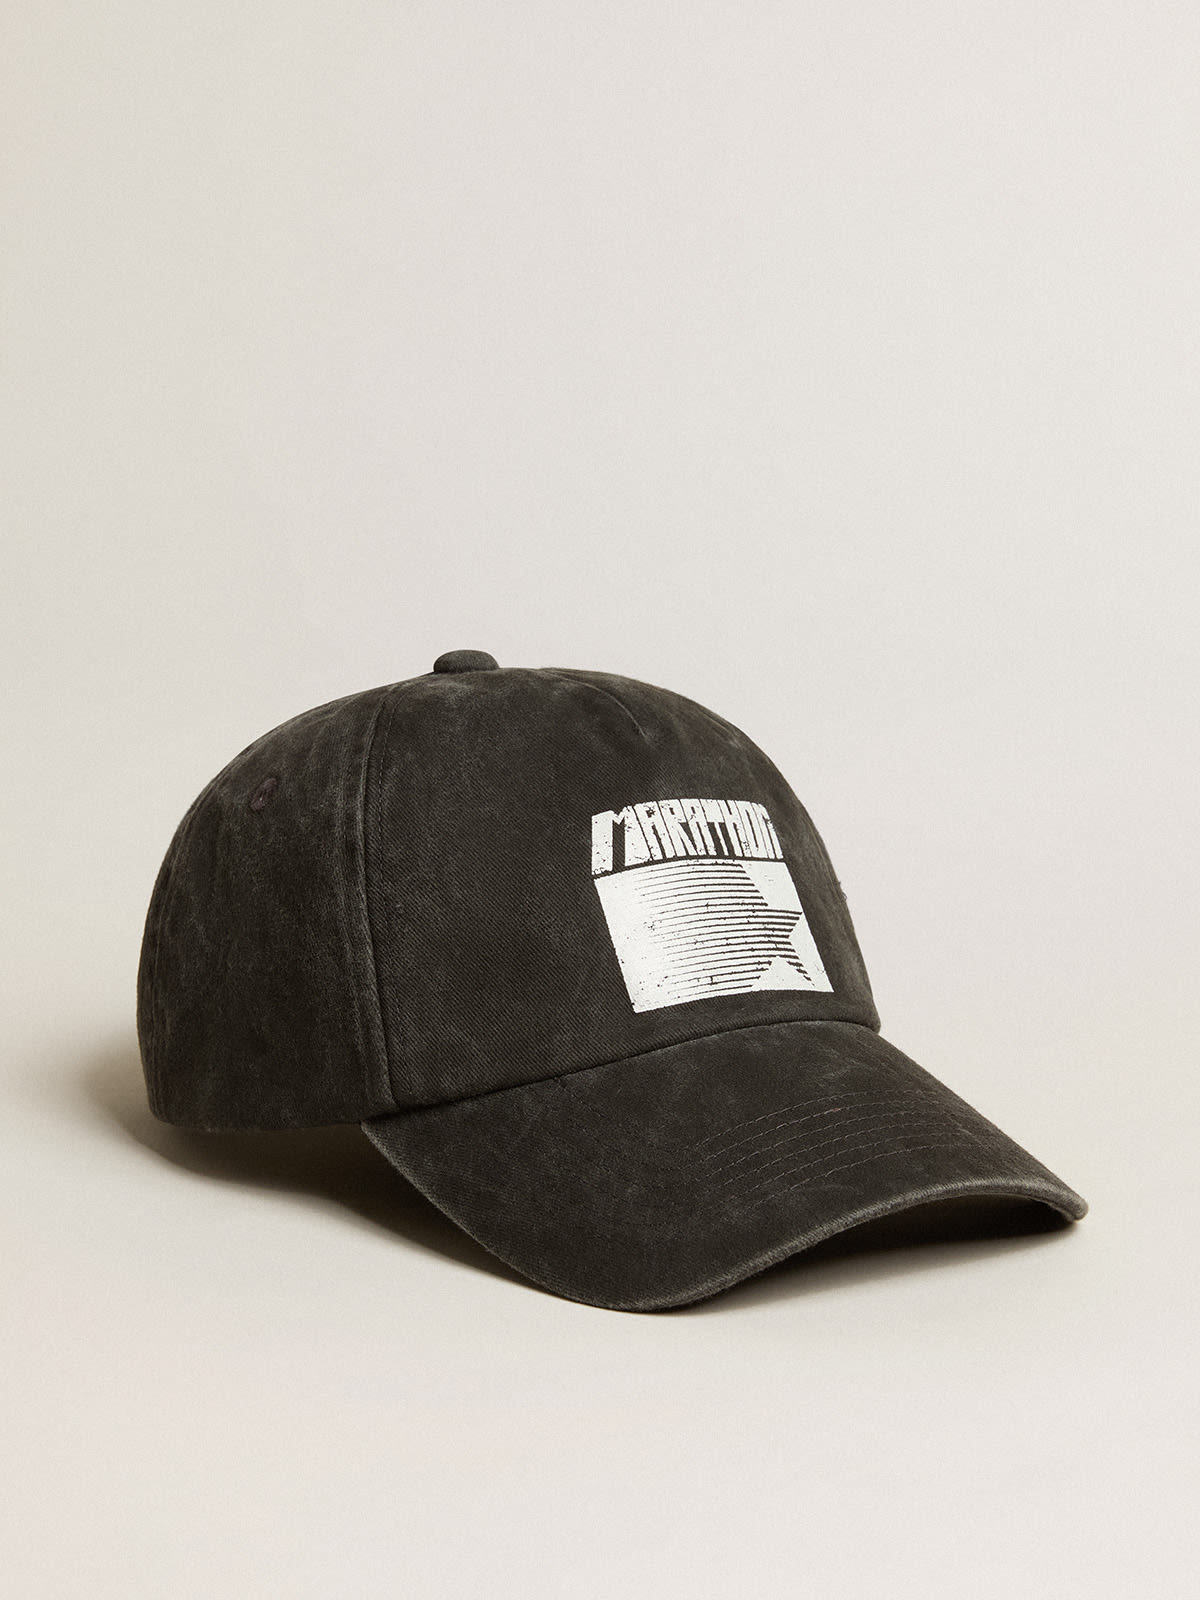 Golden Goose - Anthracite gray cap with Marathon logo on the front in 